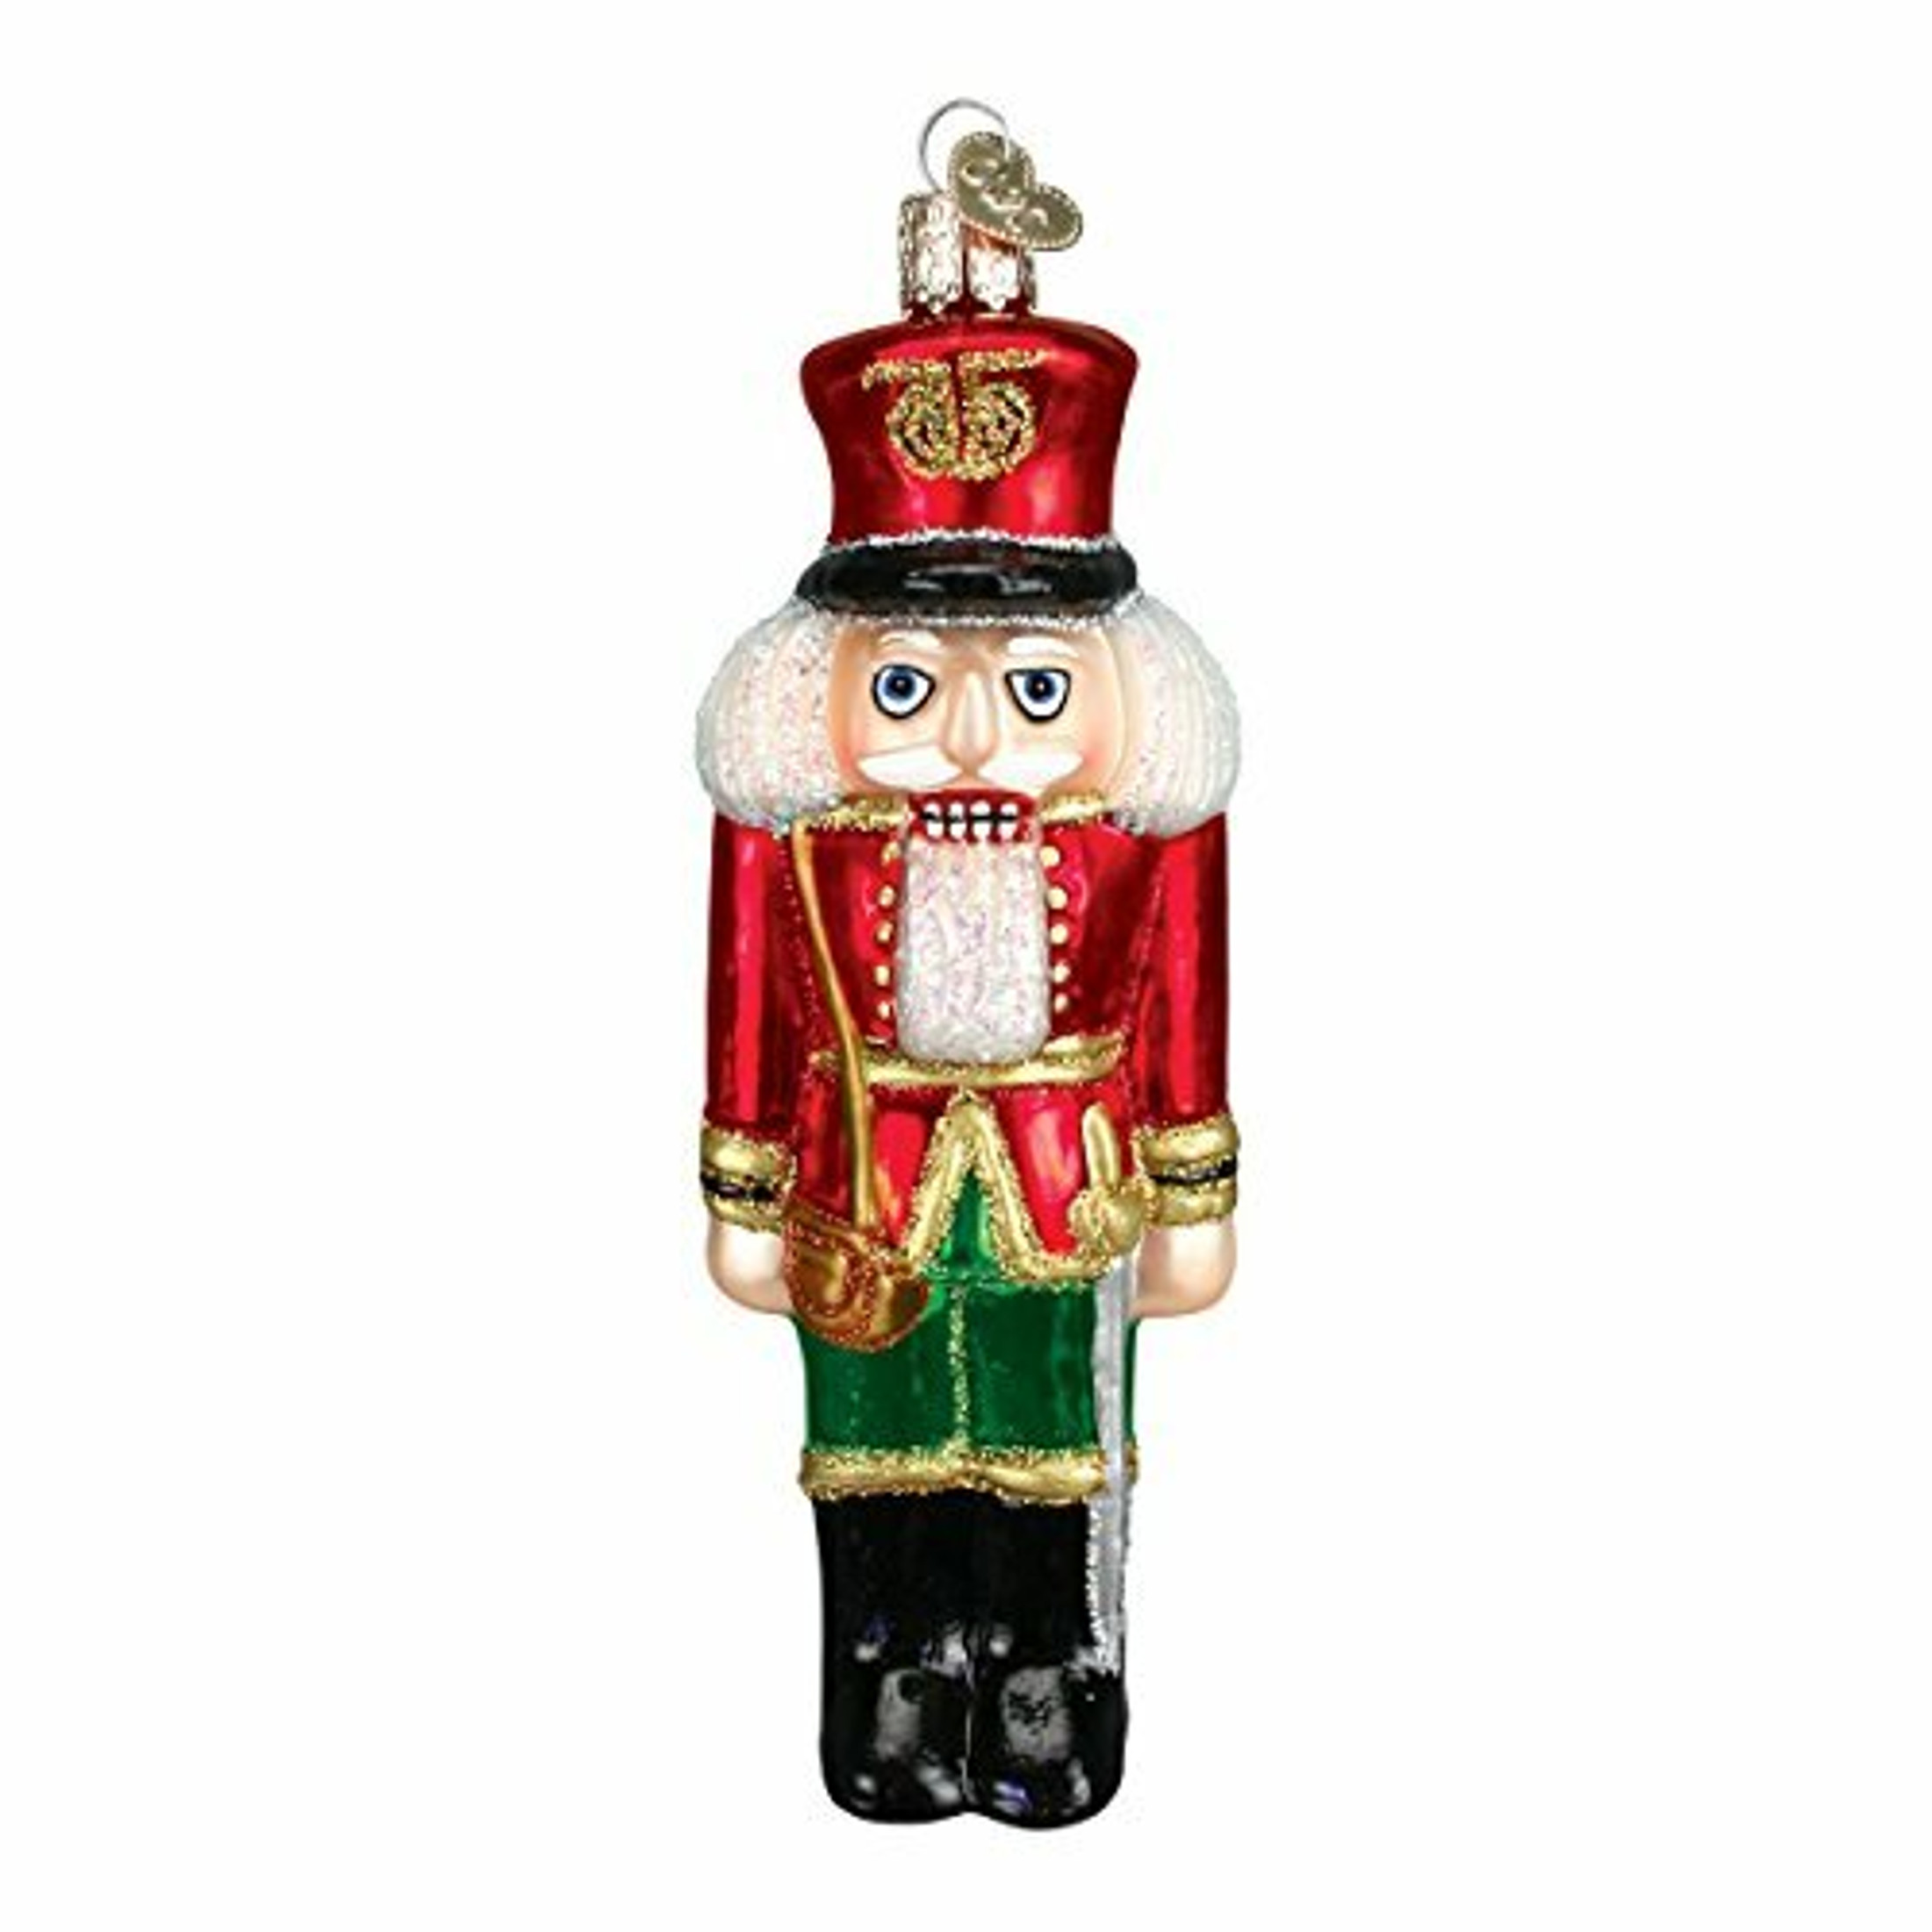 Old World Christmas Ornaments: Soldier Nutcracker Glass Blown Ornaments for Christmas Tree- 2 Count